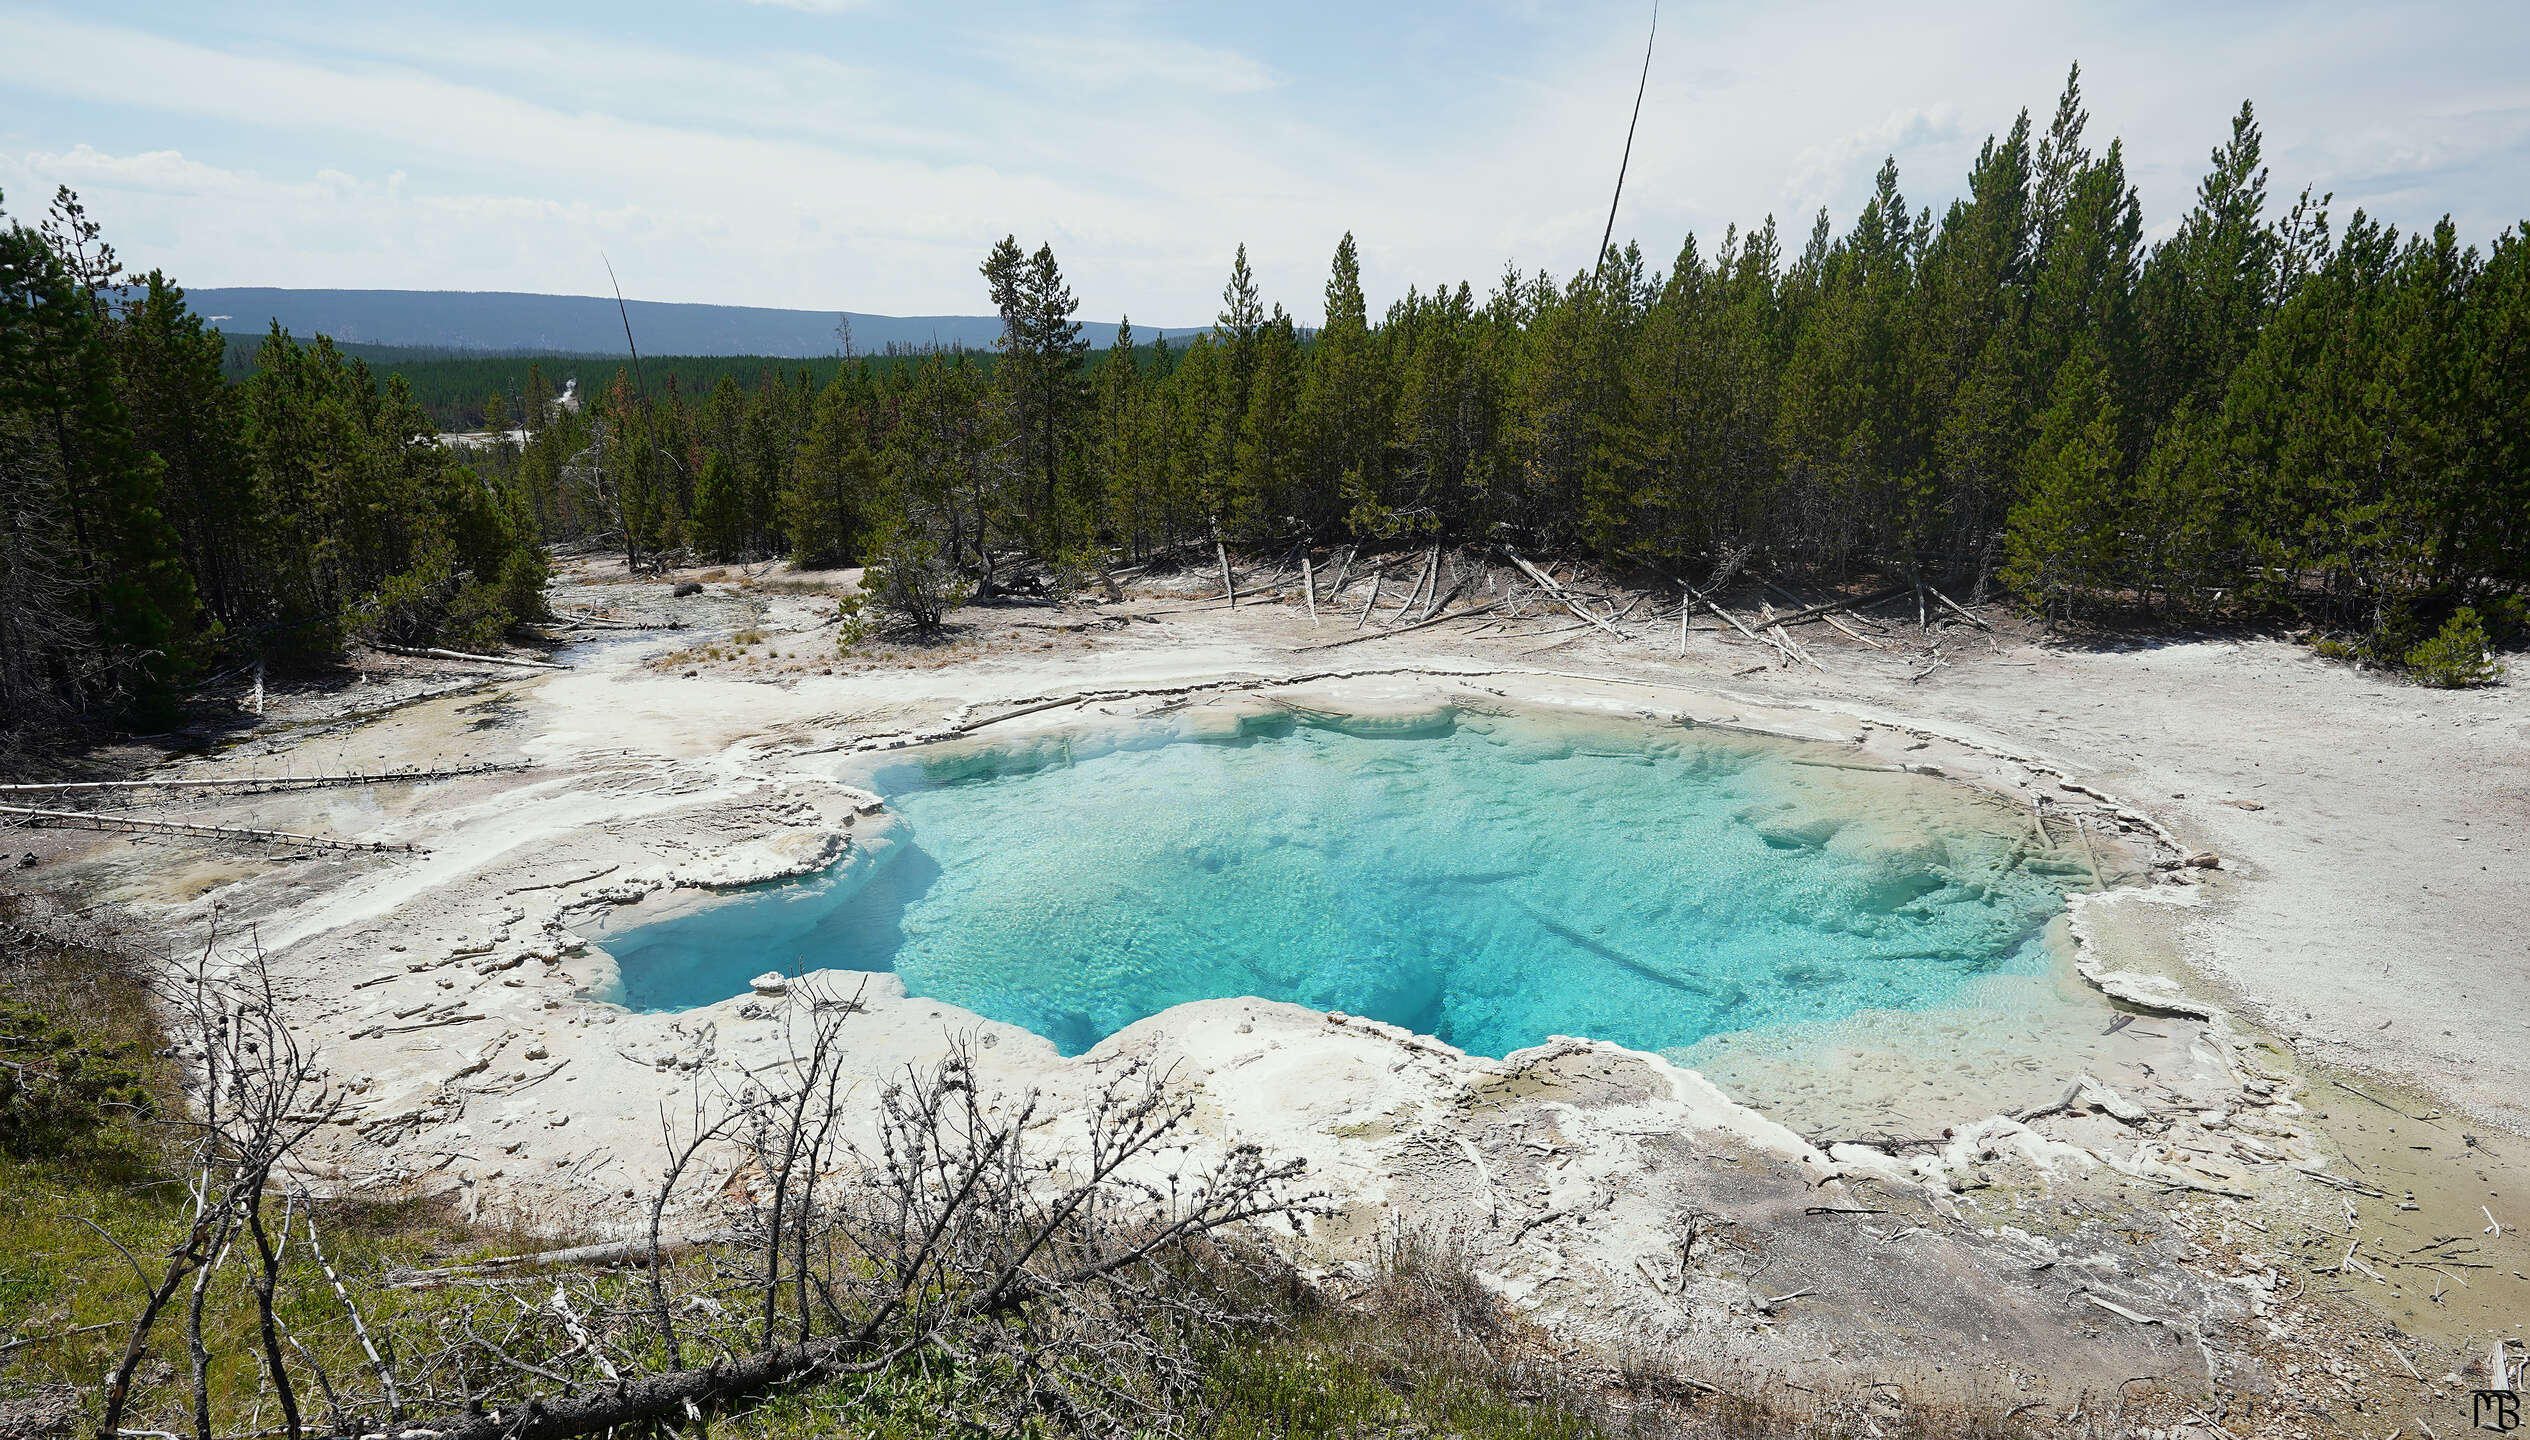 A blue spring in the Norris Geyser Basin